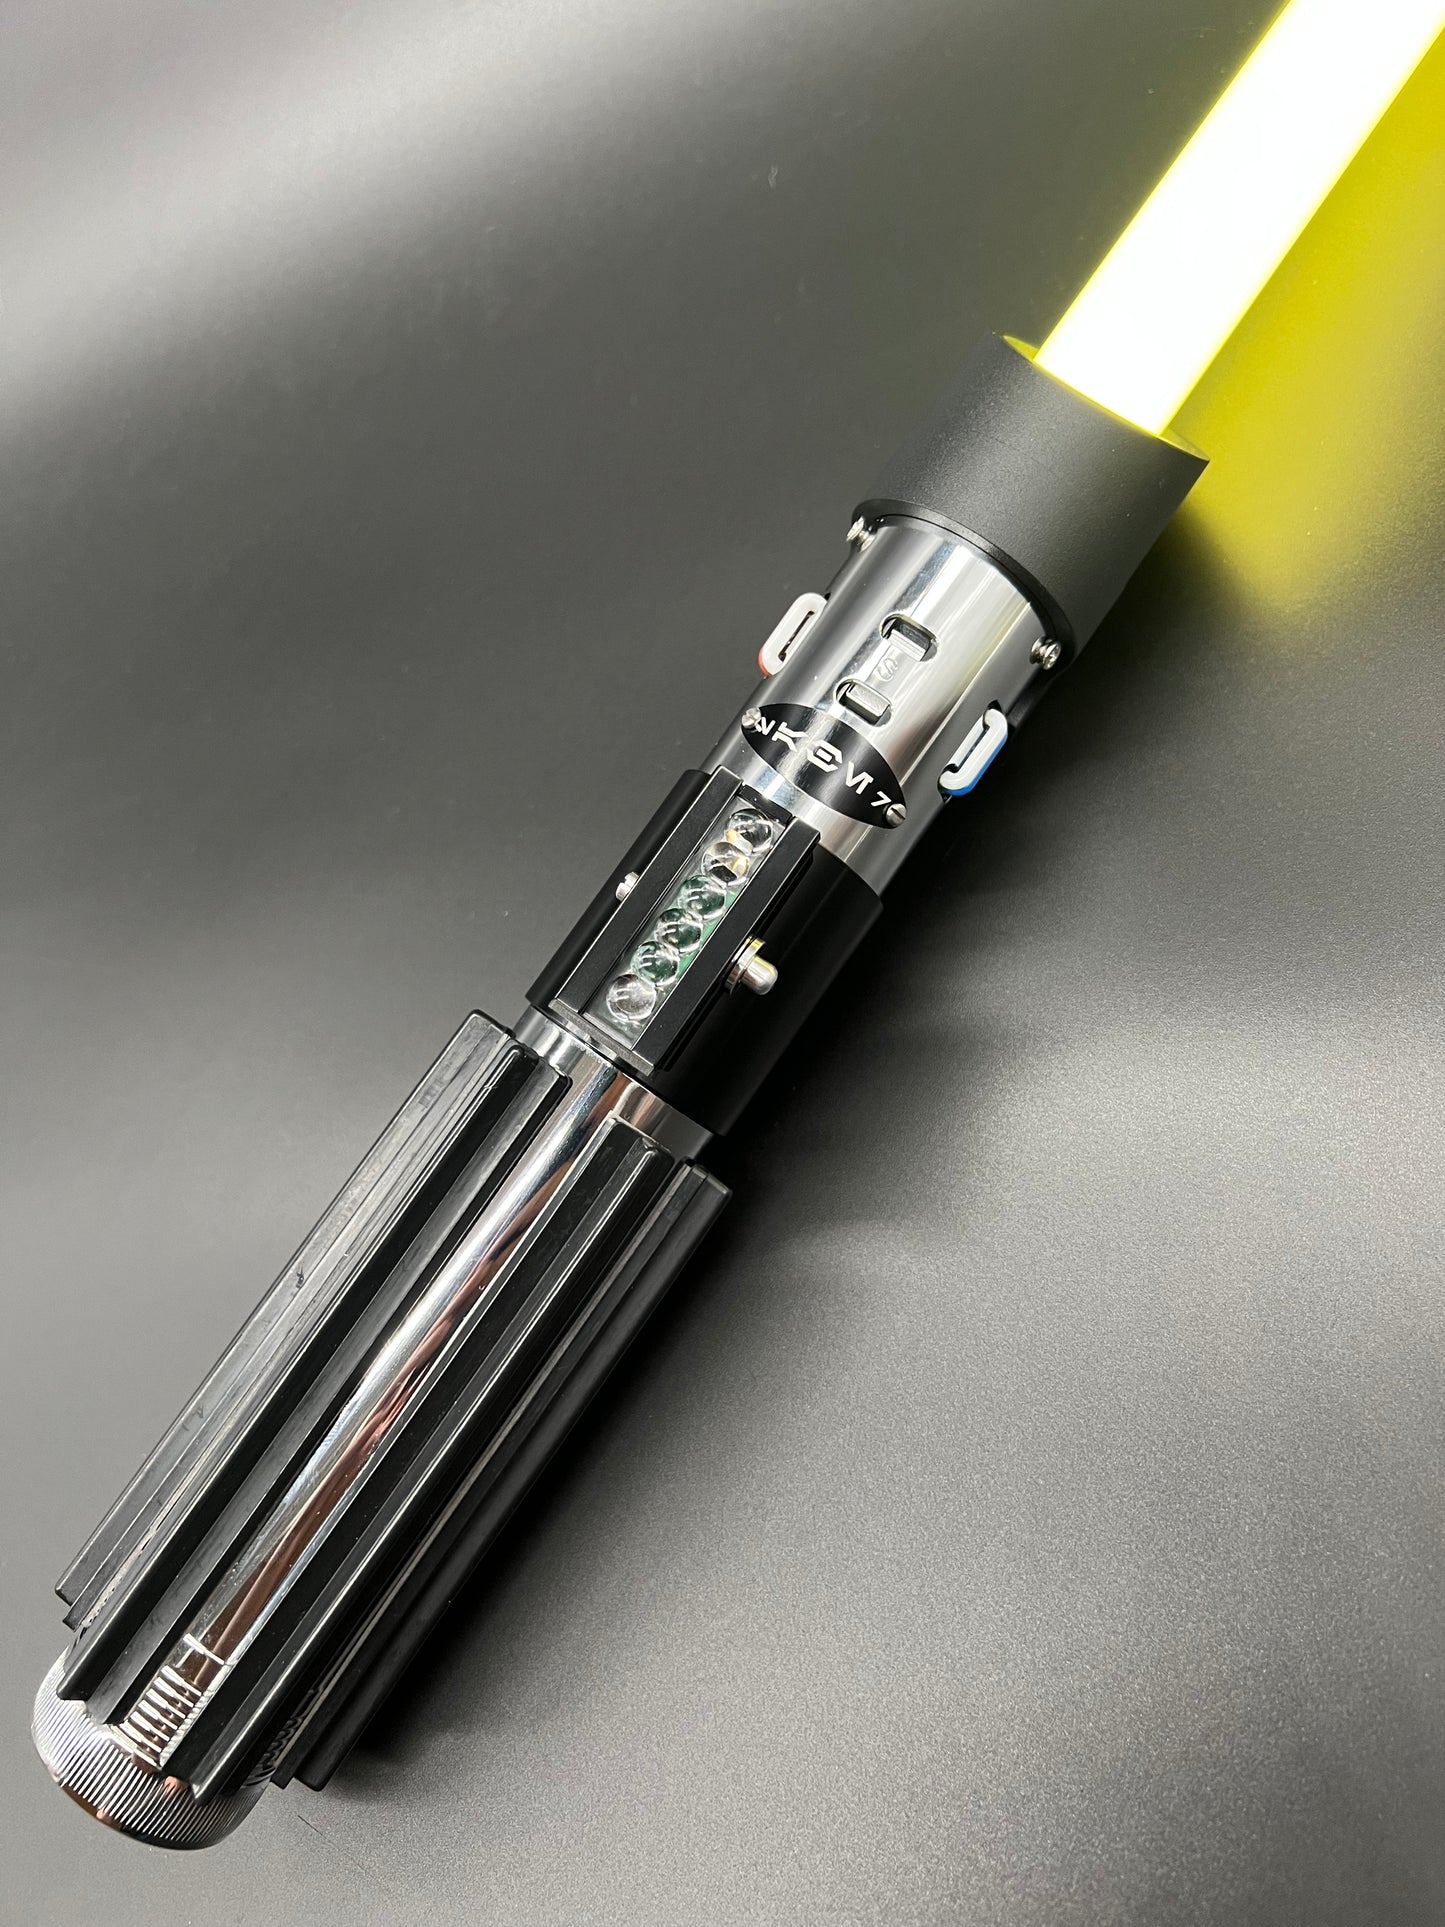 THE LORD VADER LIGHTSABER